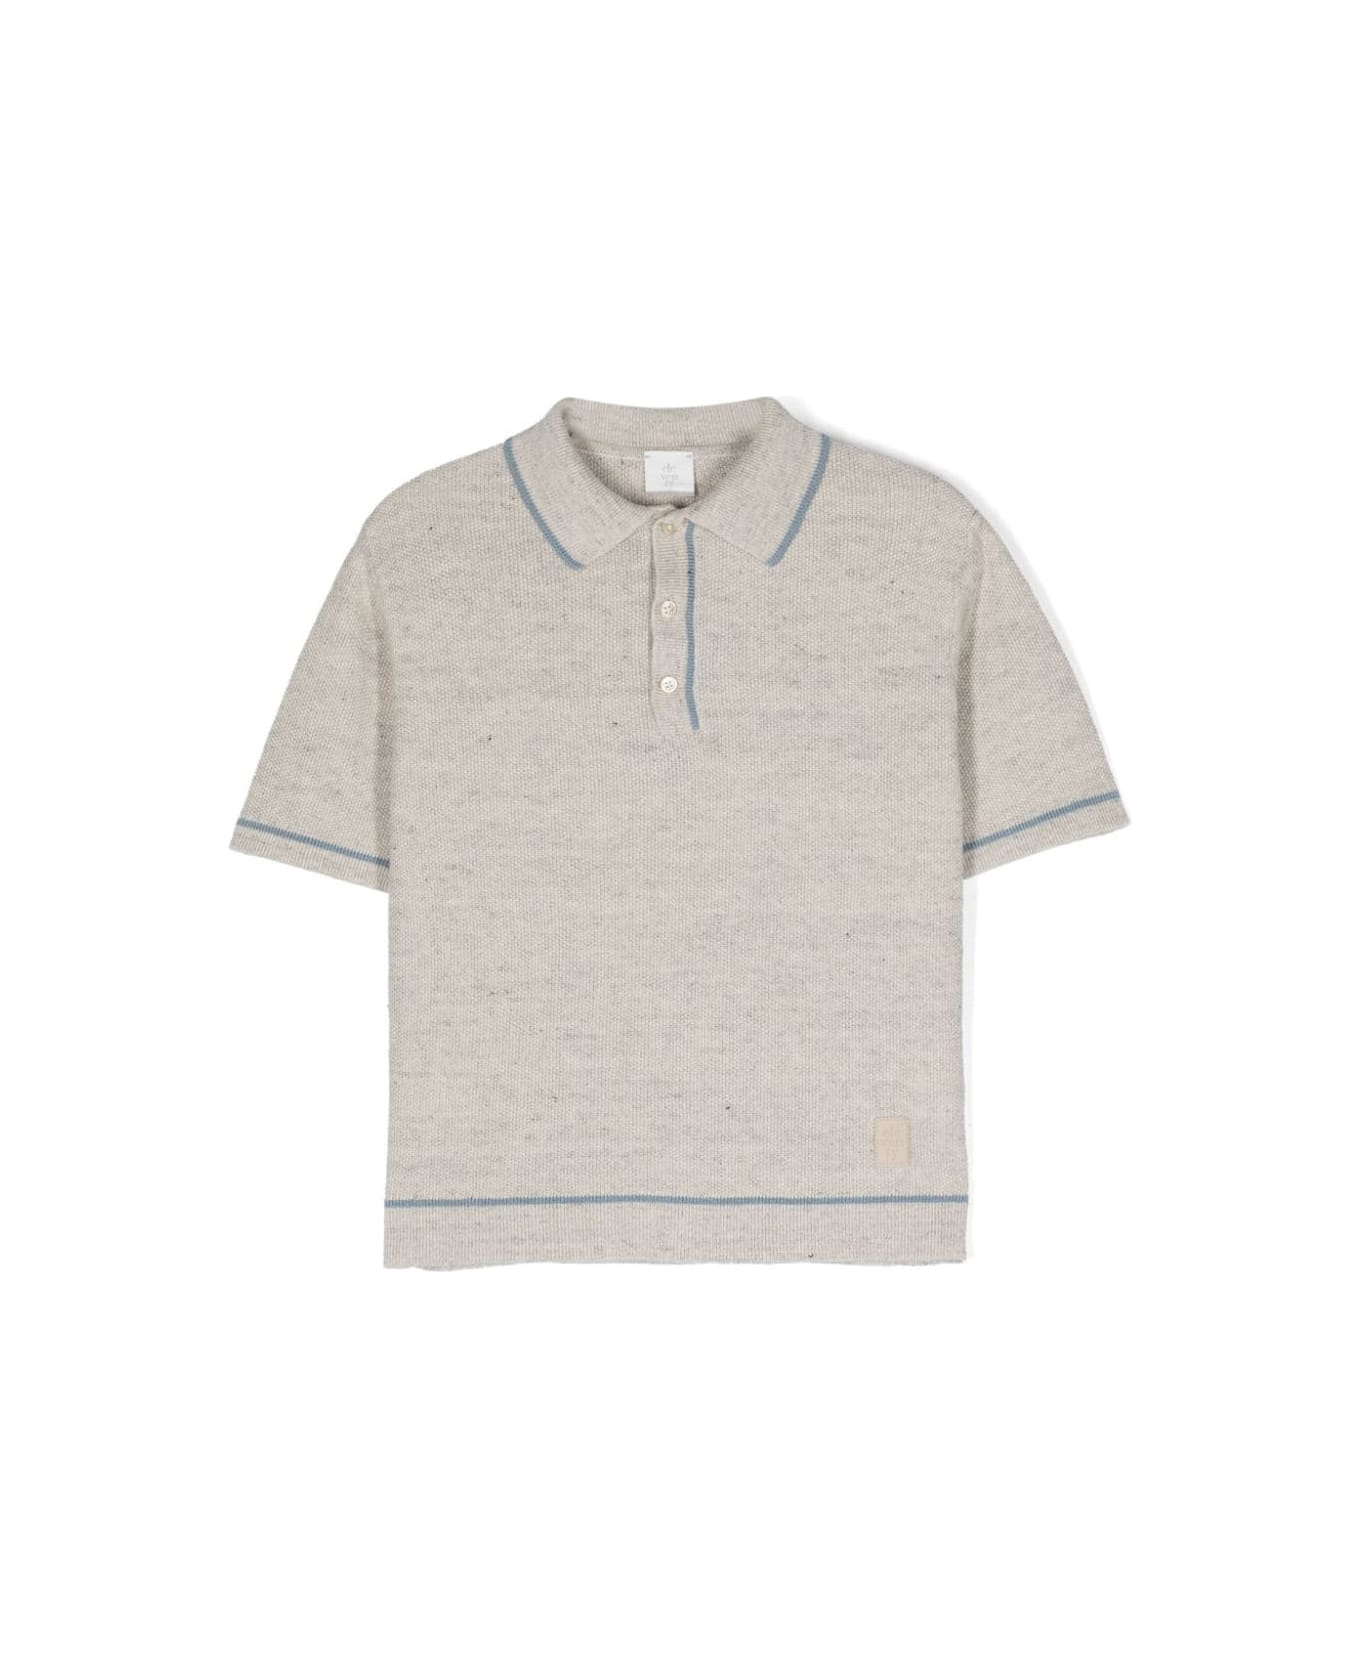 Eleventy Grey Knitted Polo Shirt With Blue Stripes - Grey